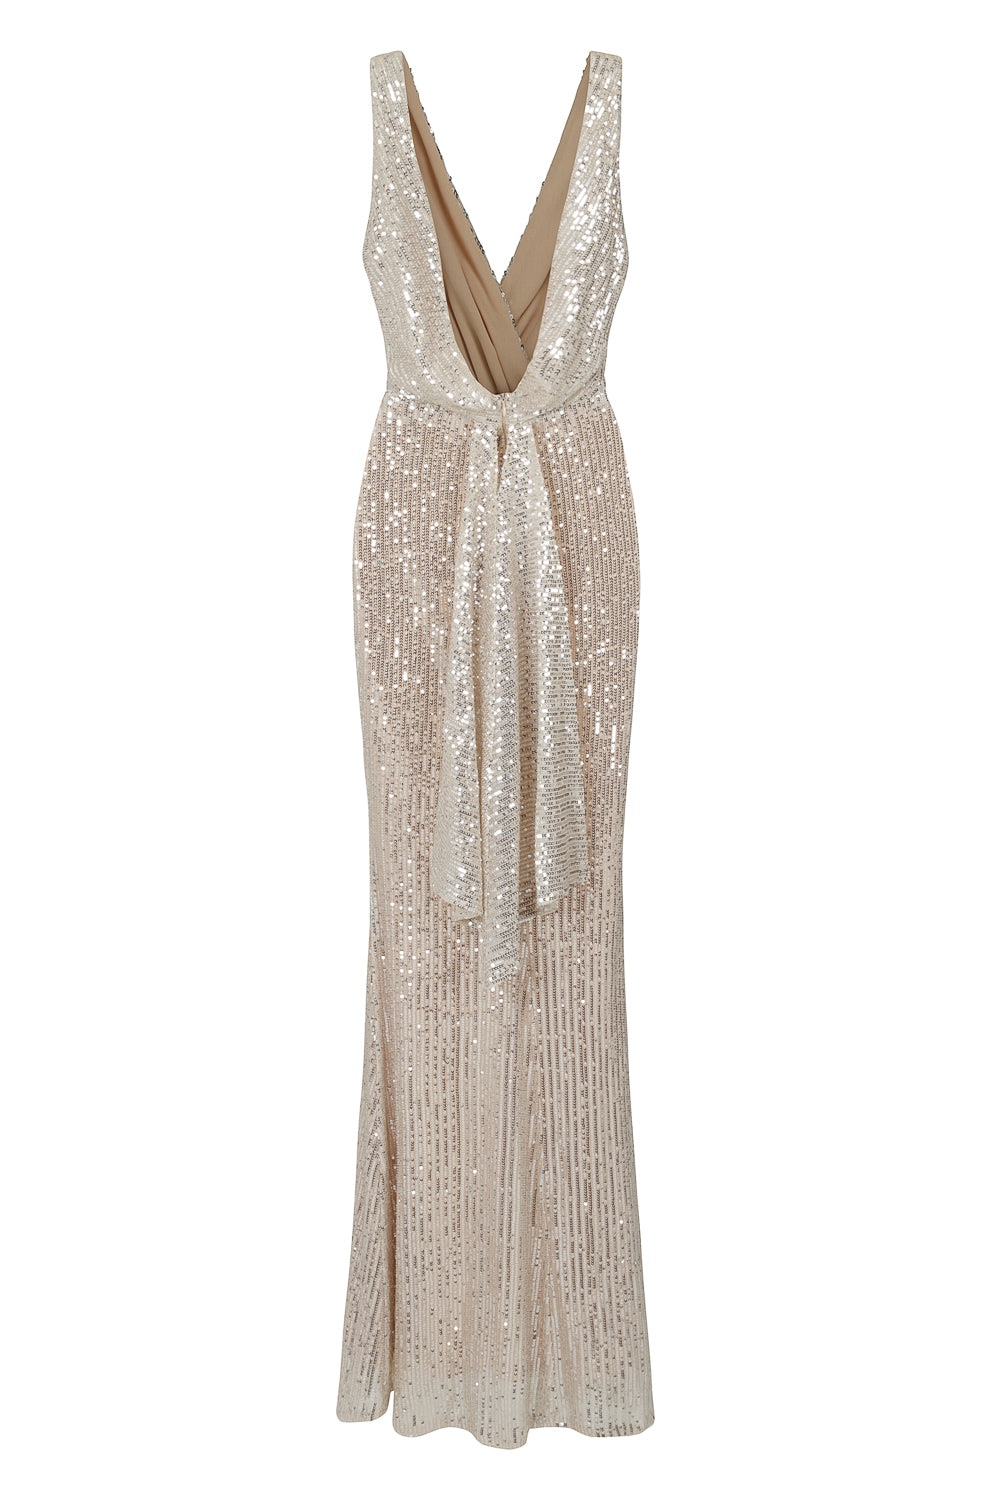 The One Silver Sequin Plunge Backless Maxi Dress